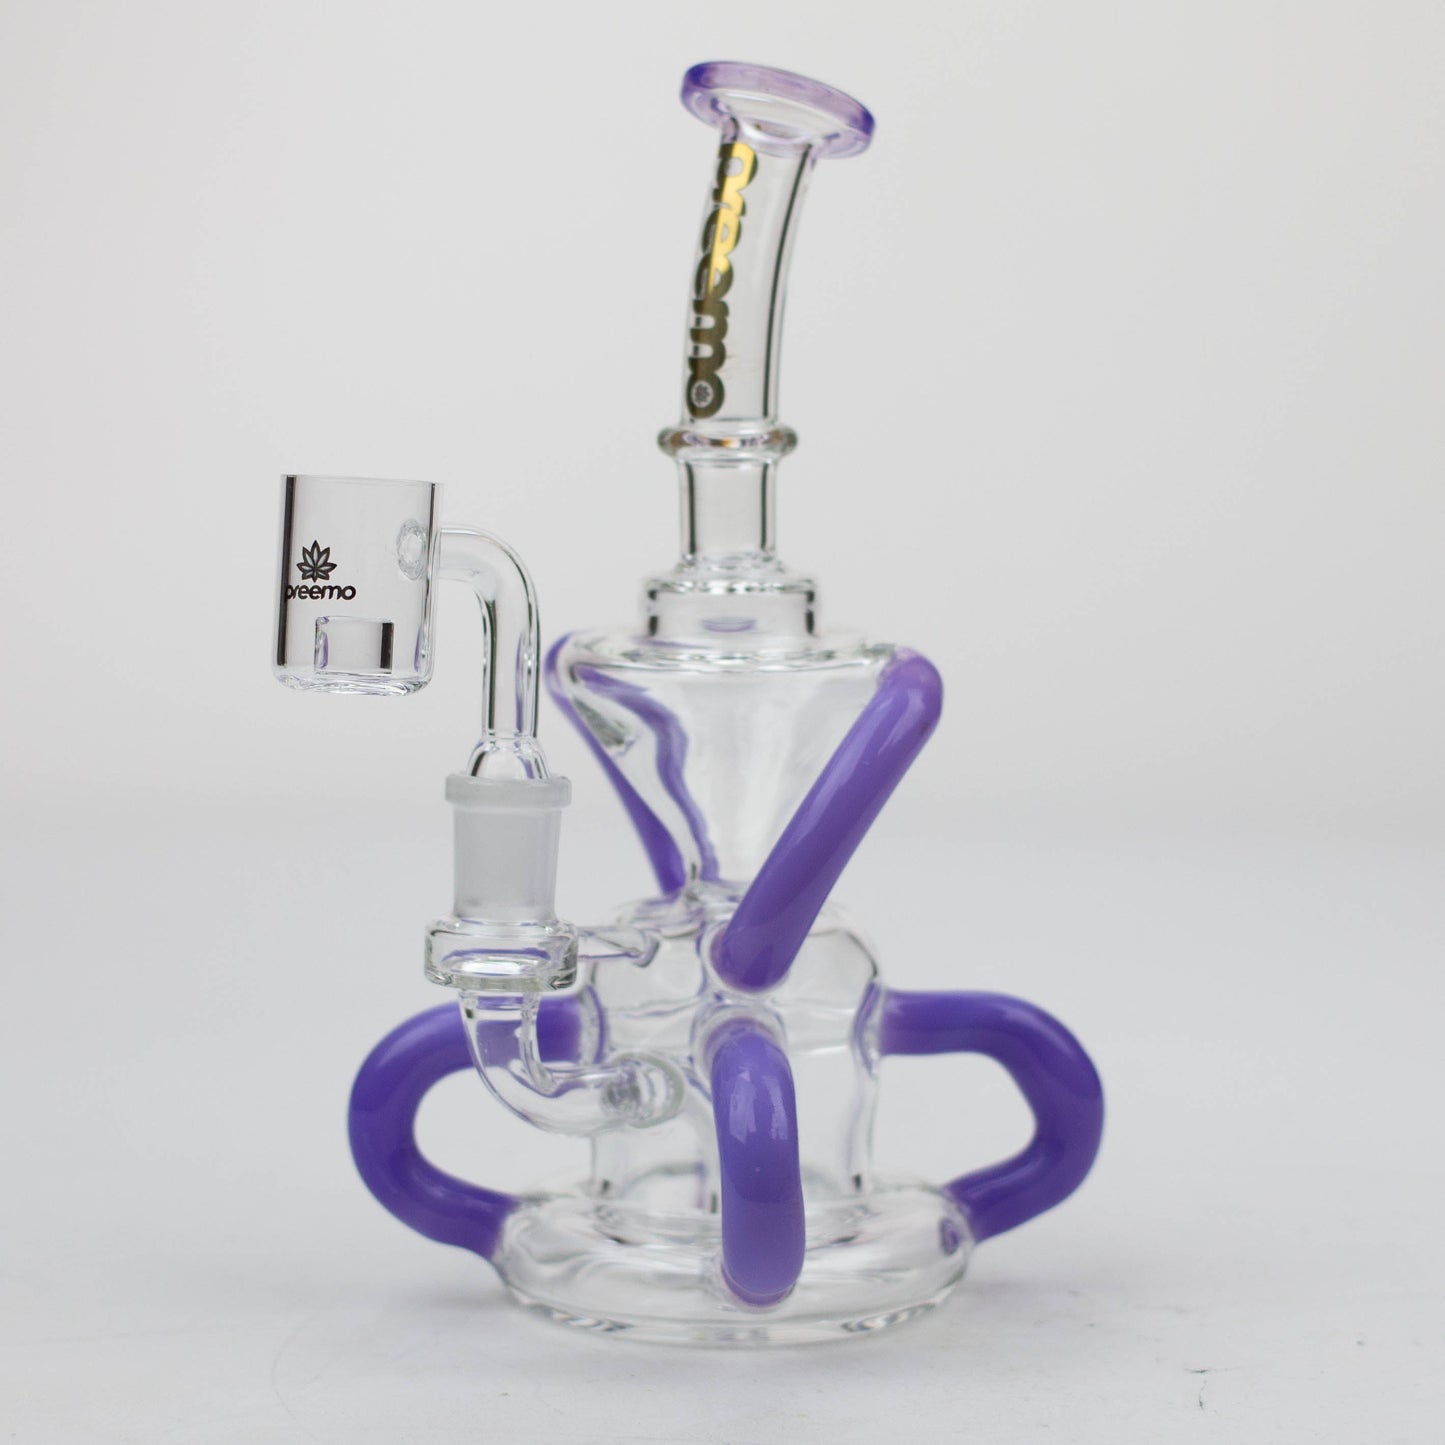 preemo - 8 inch 6-Arm Recycler Rig [P032]_6